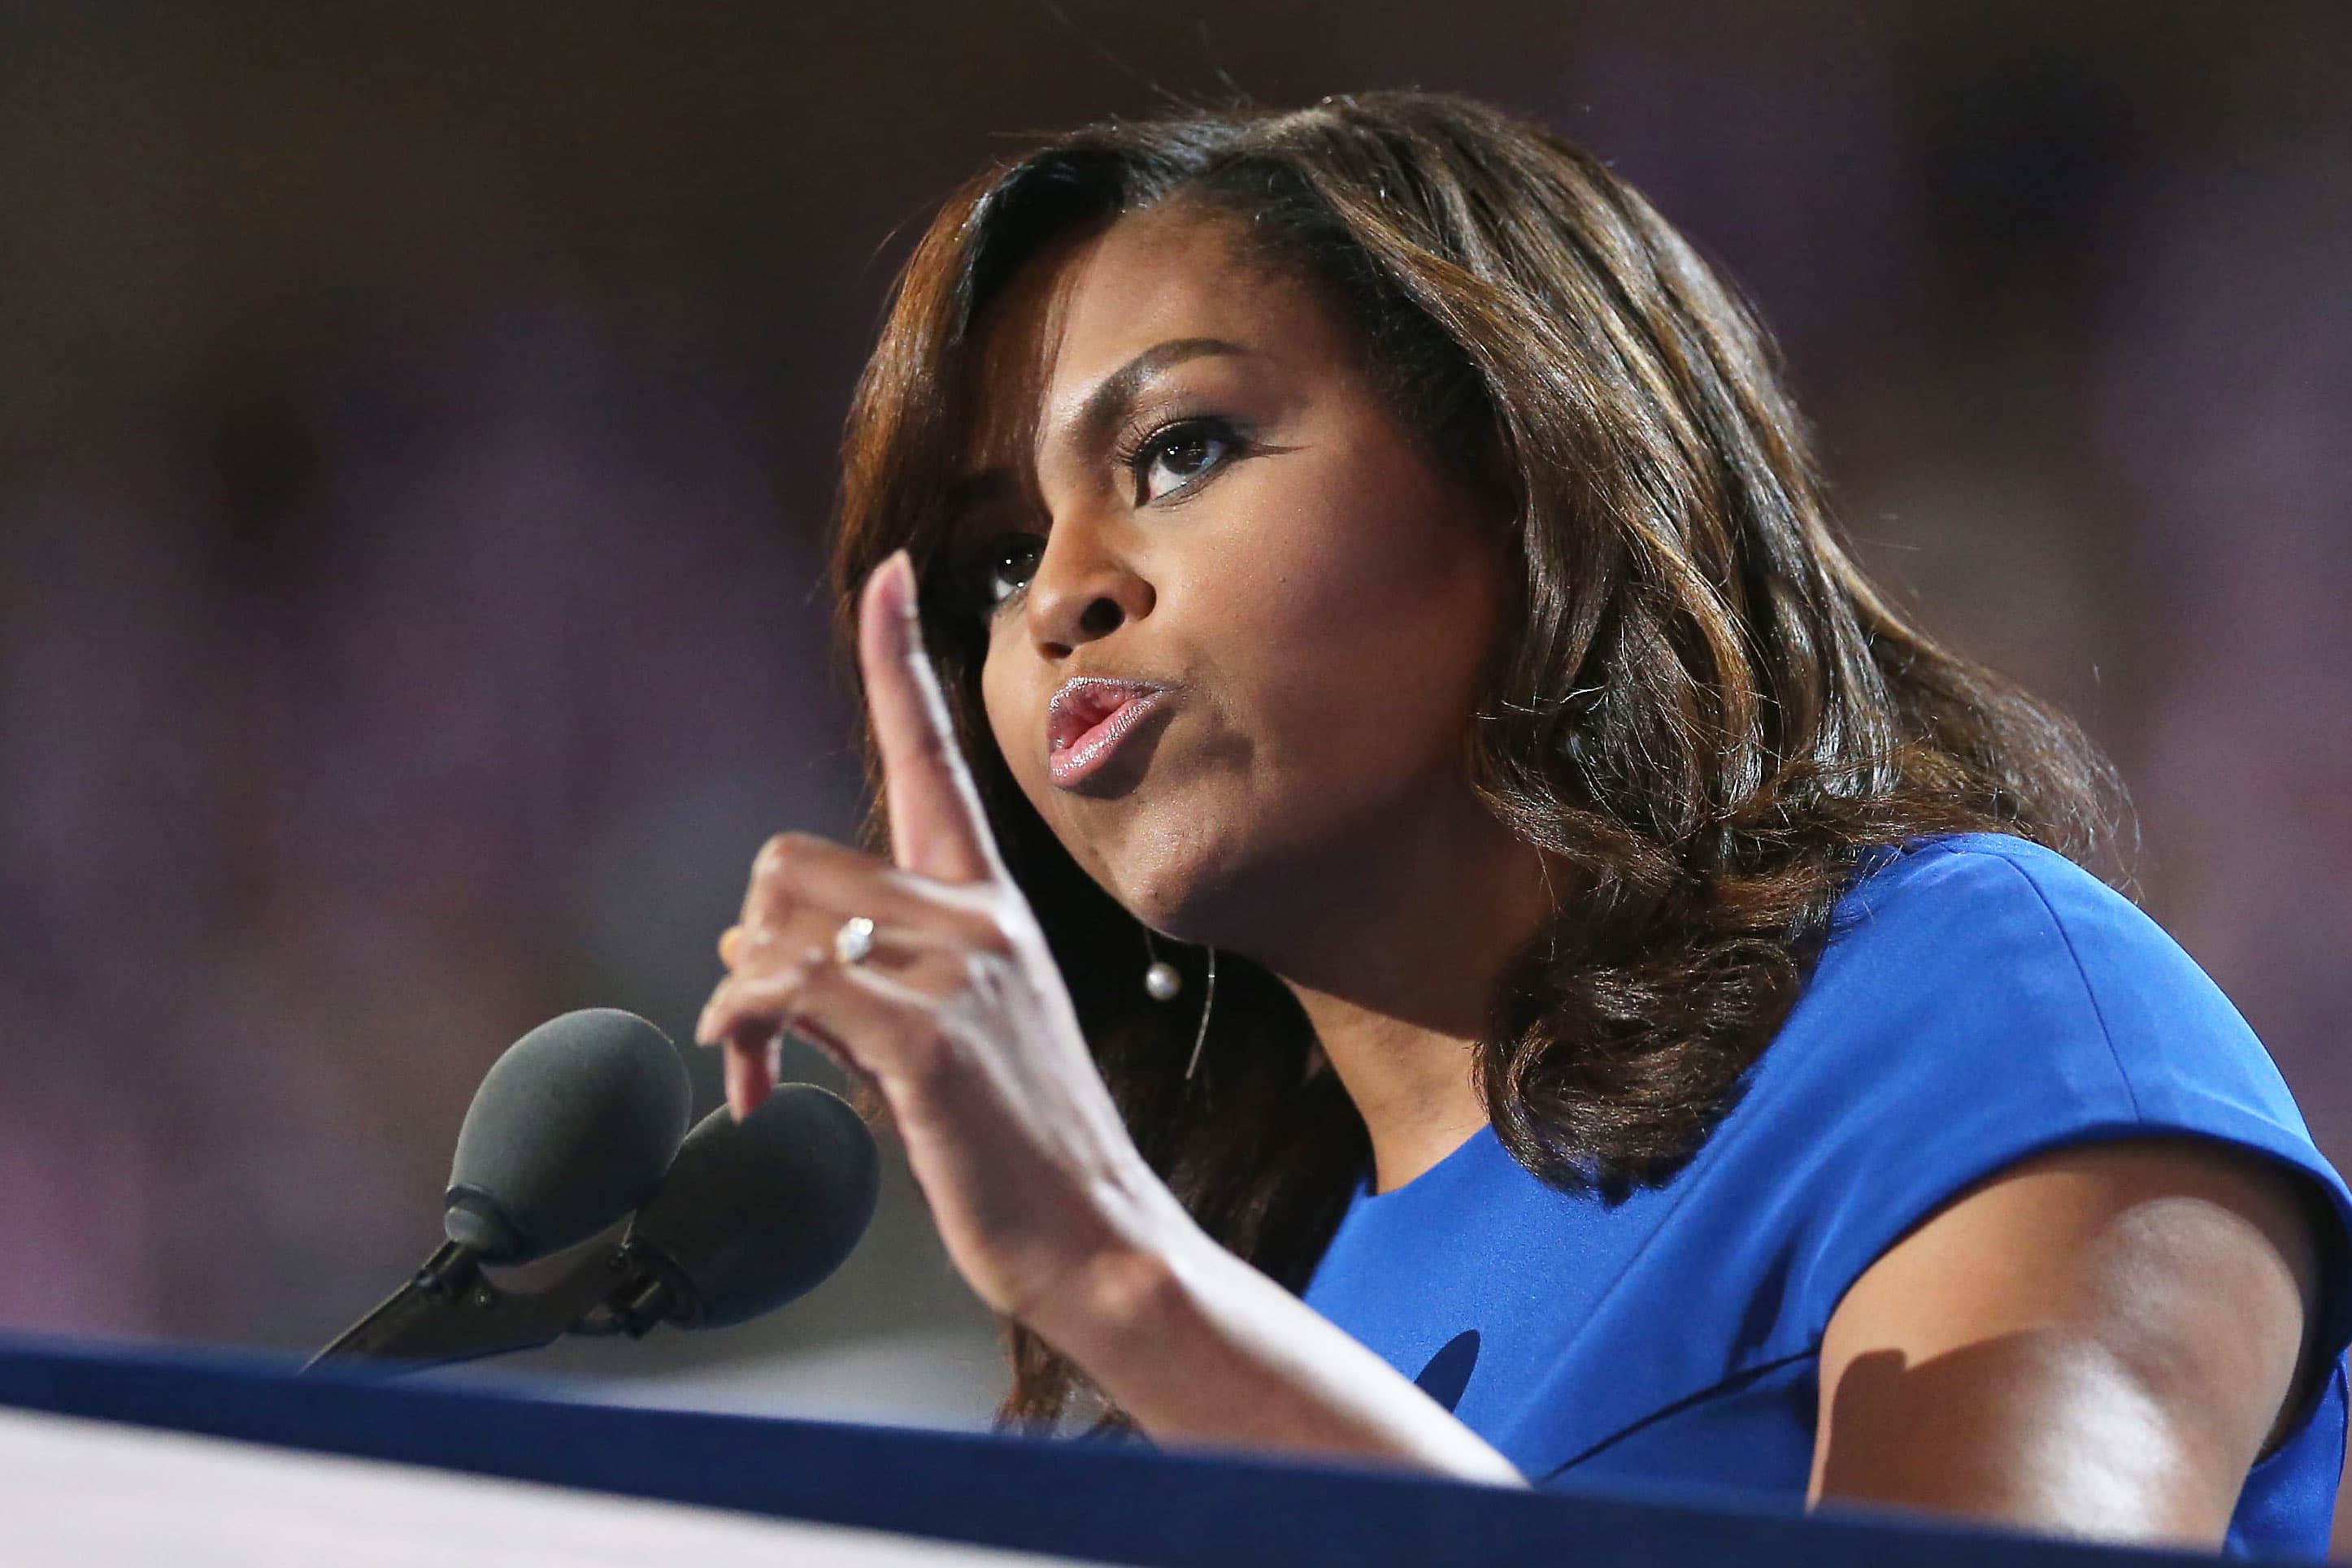 Michelle Obama calls on Facebook and other platforms to ban Trump forever